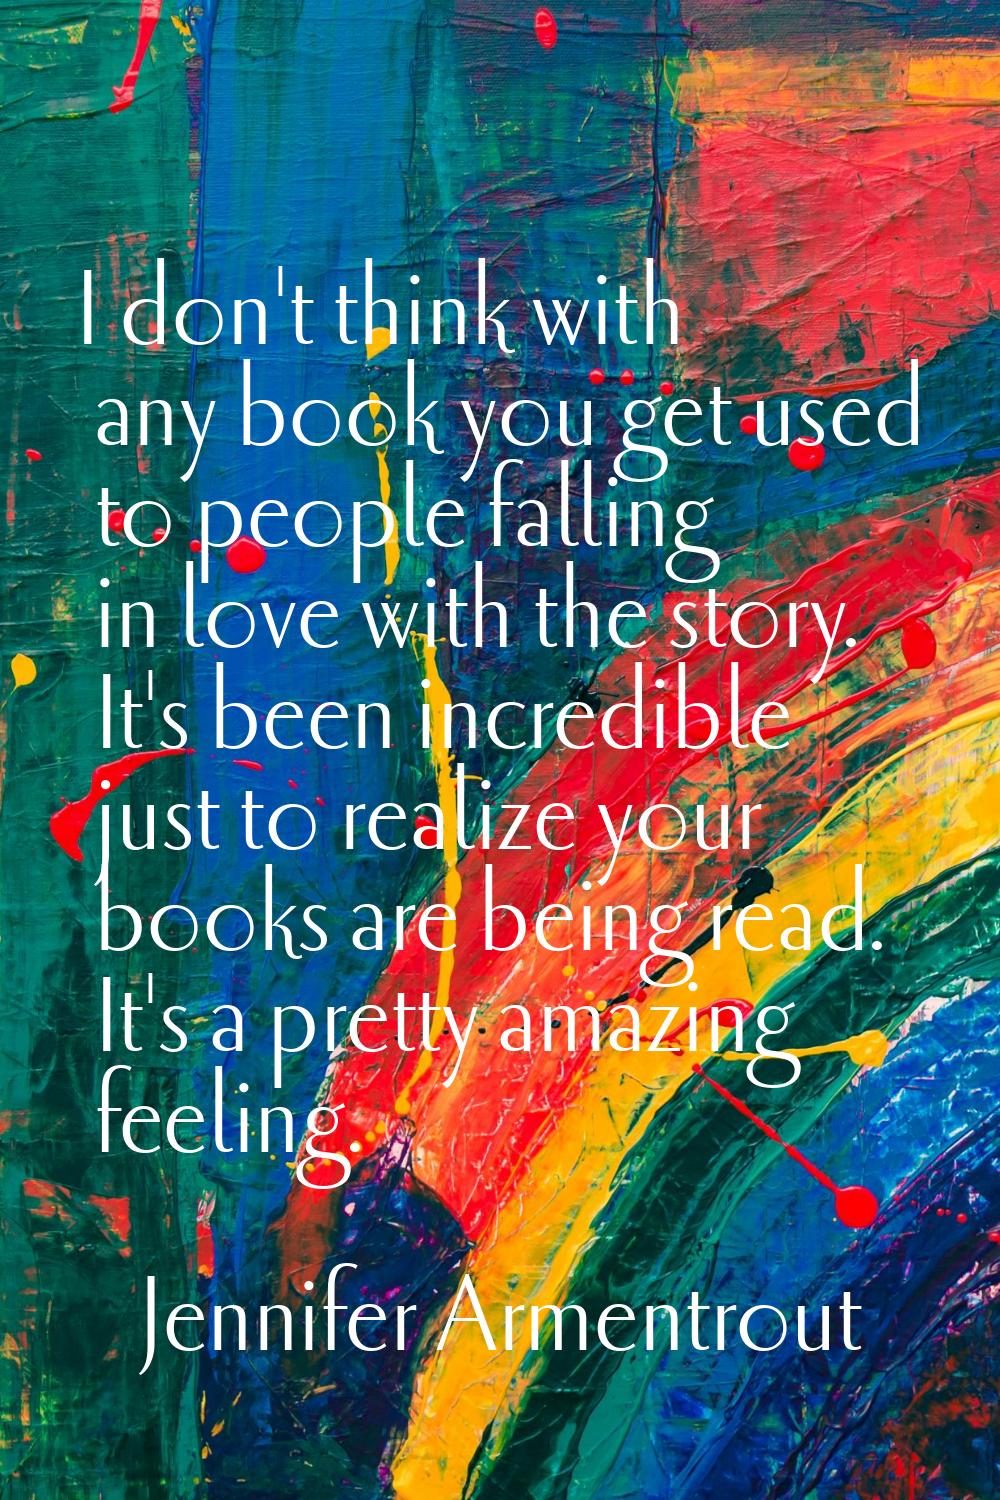 I don't think with any book you get used to people falling in love with the story. It's been incred